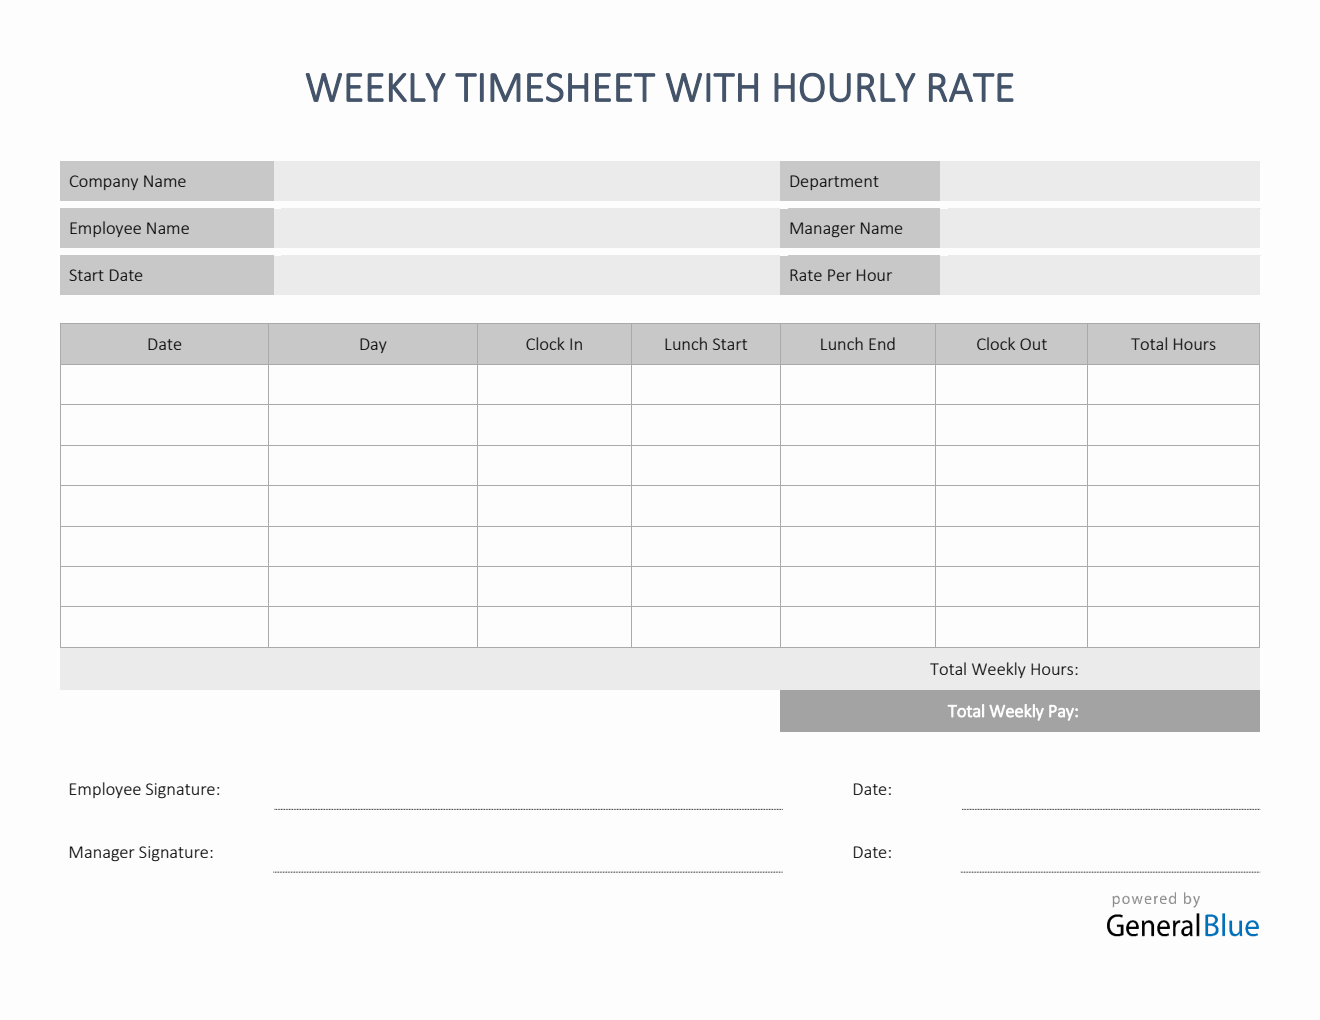 Weekly Timesheet With Hourly Rate in PDF